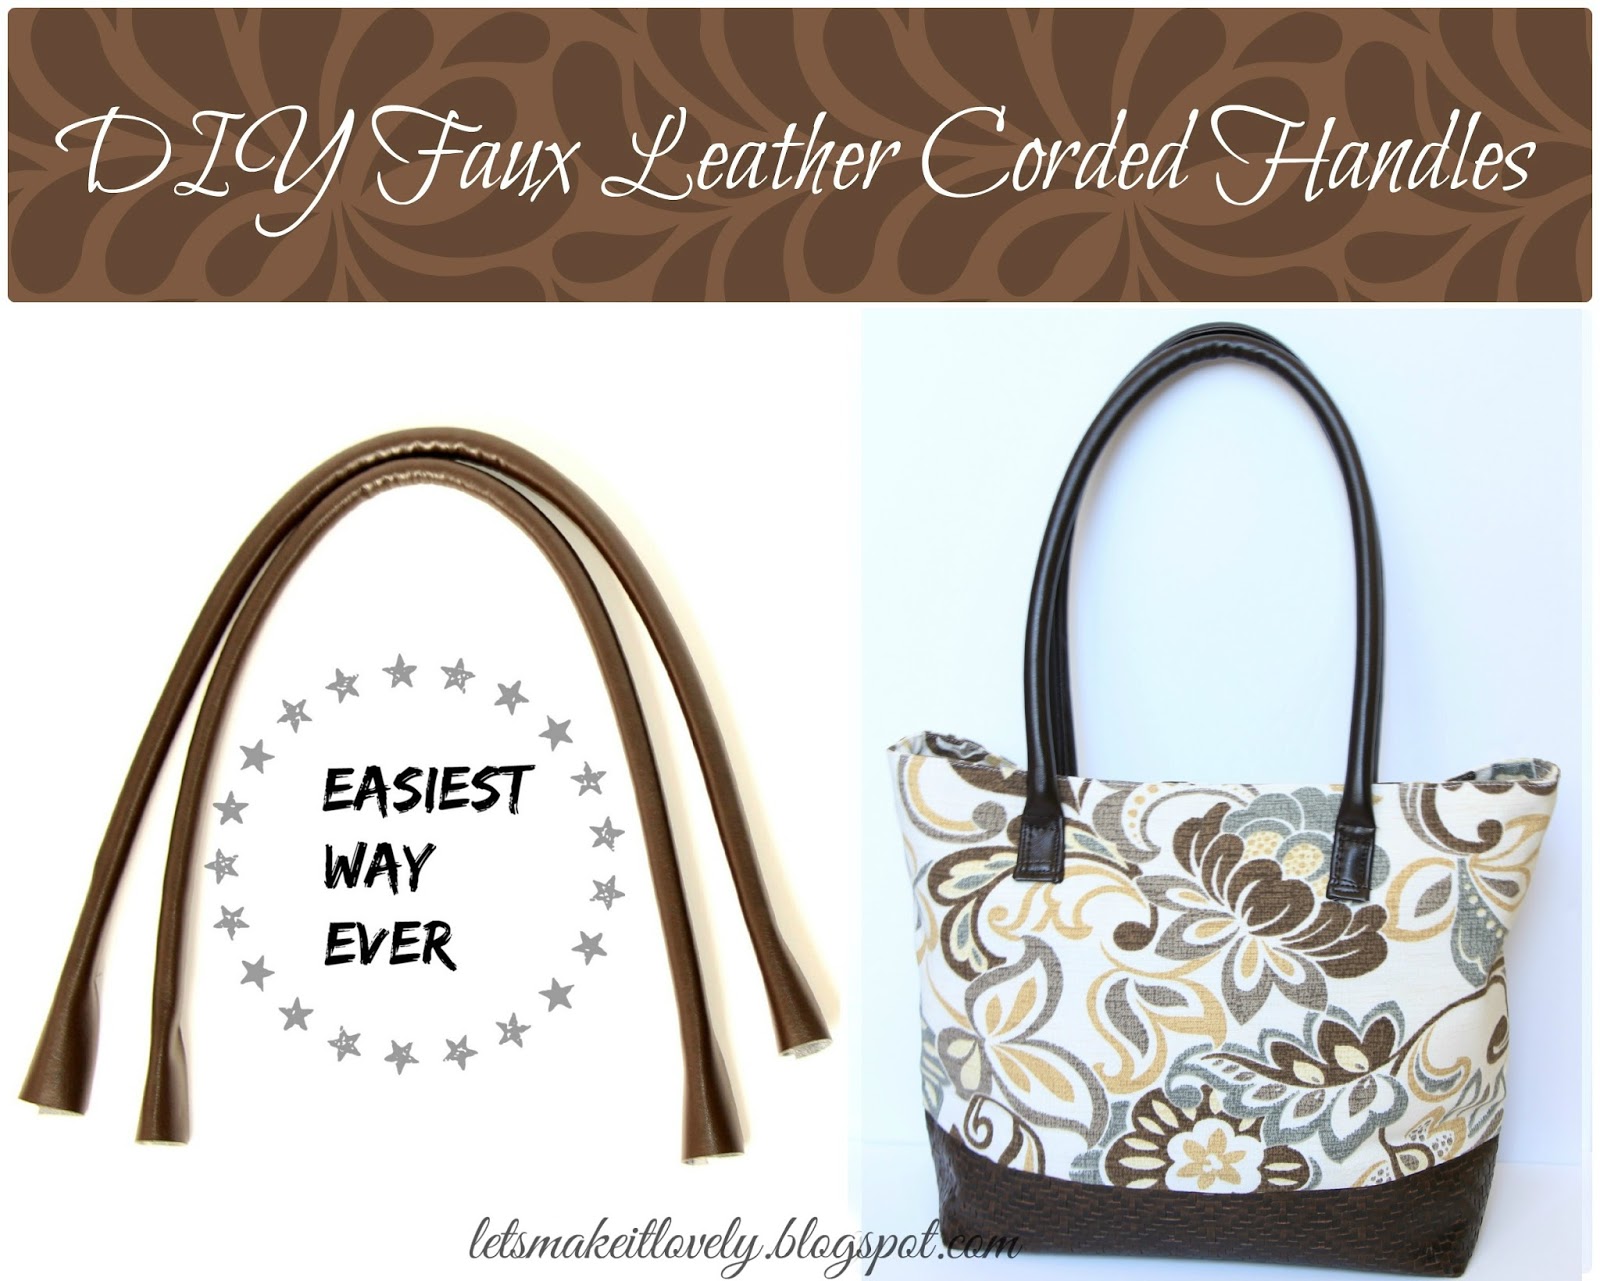 Let's make it lovely: DIY Round Corded Bag Handles the Easiest Way Ever